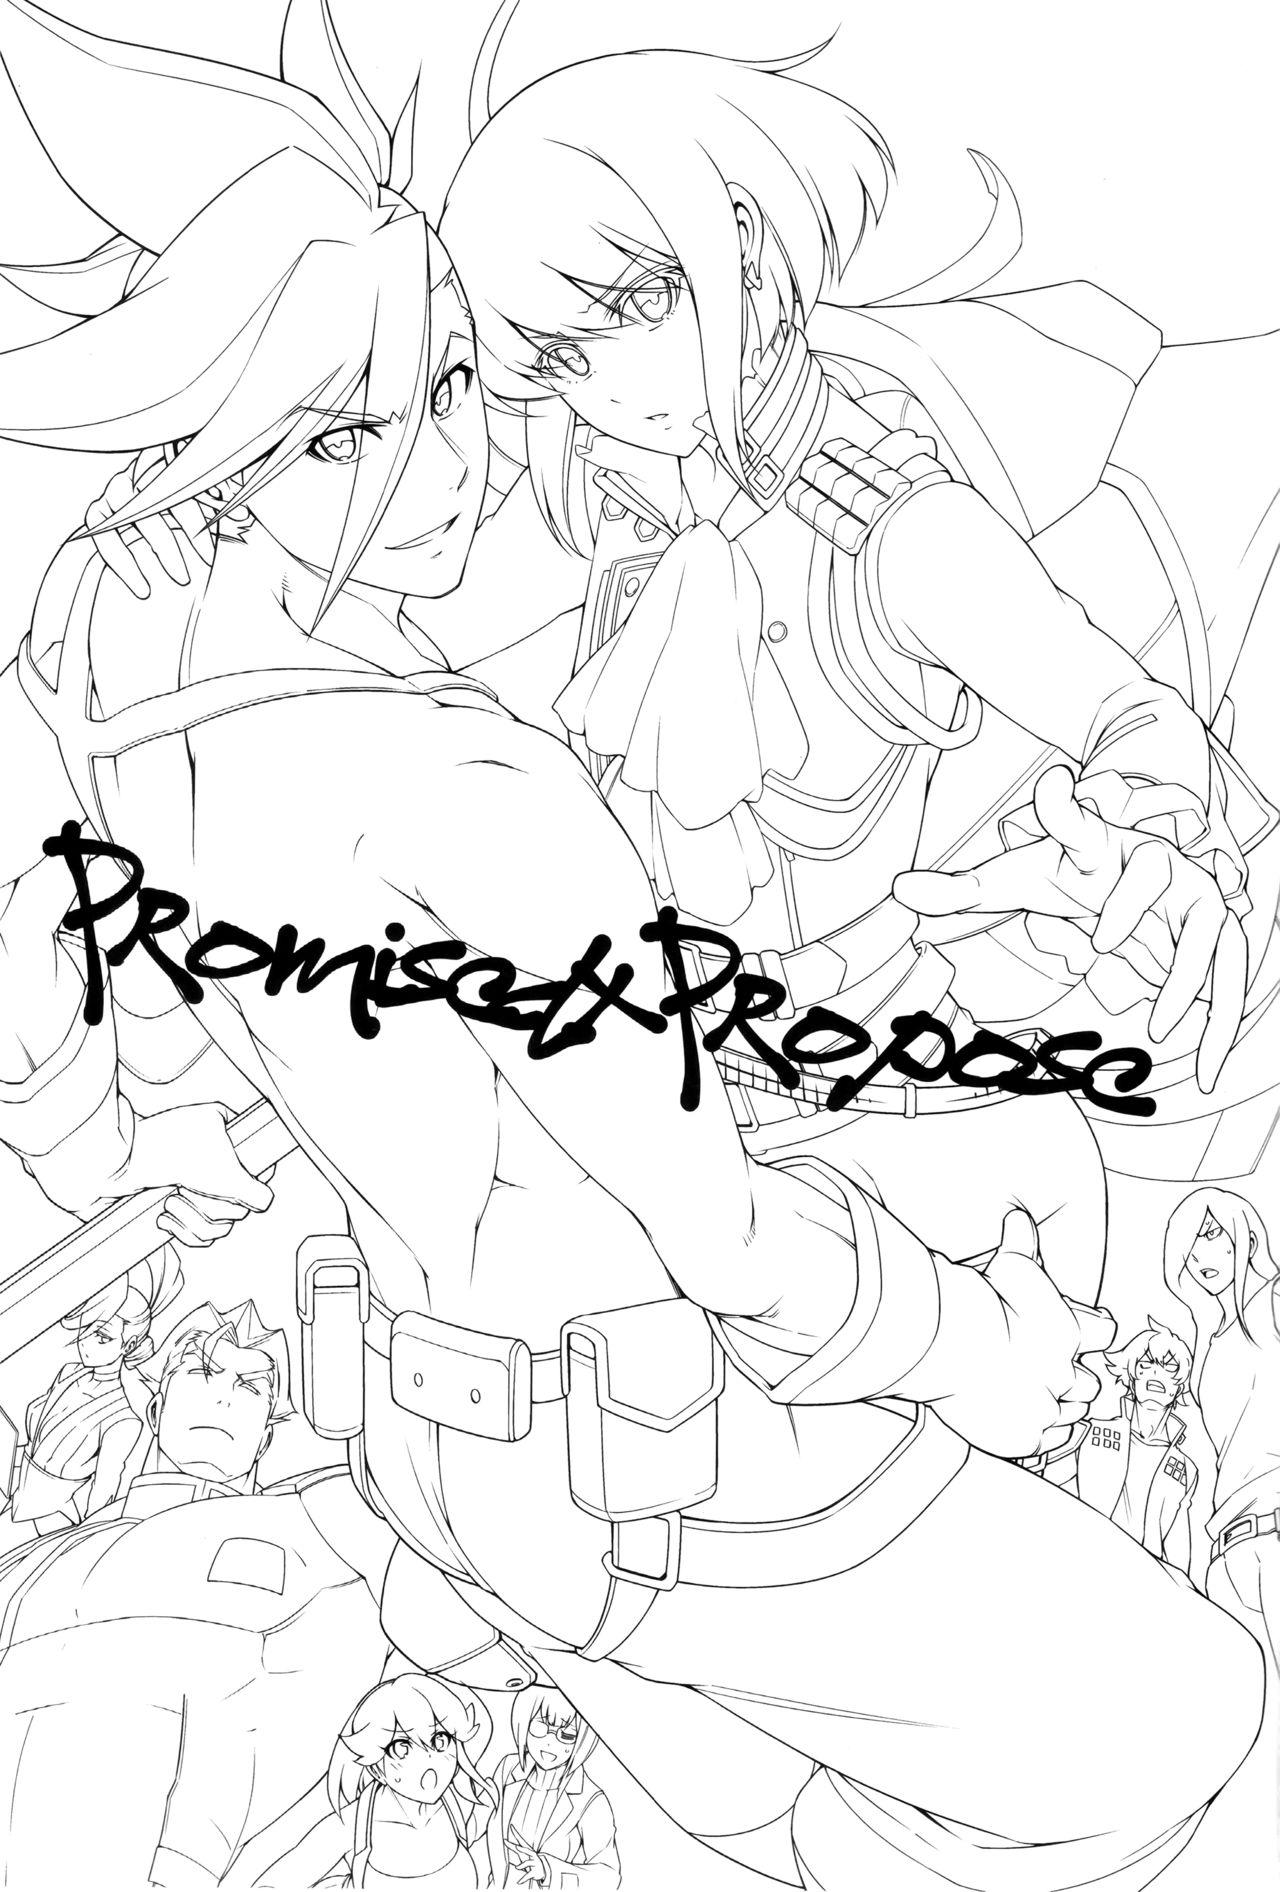 Deutsch PROMISED PROPOSE - Promare Boobies - Page 3